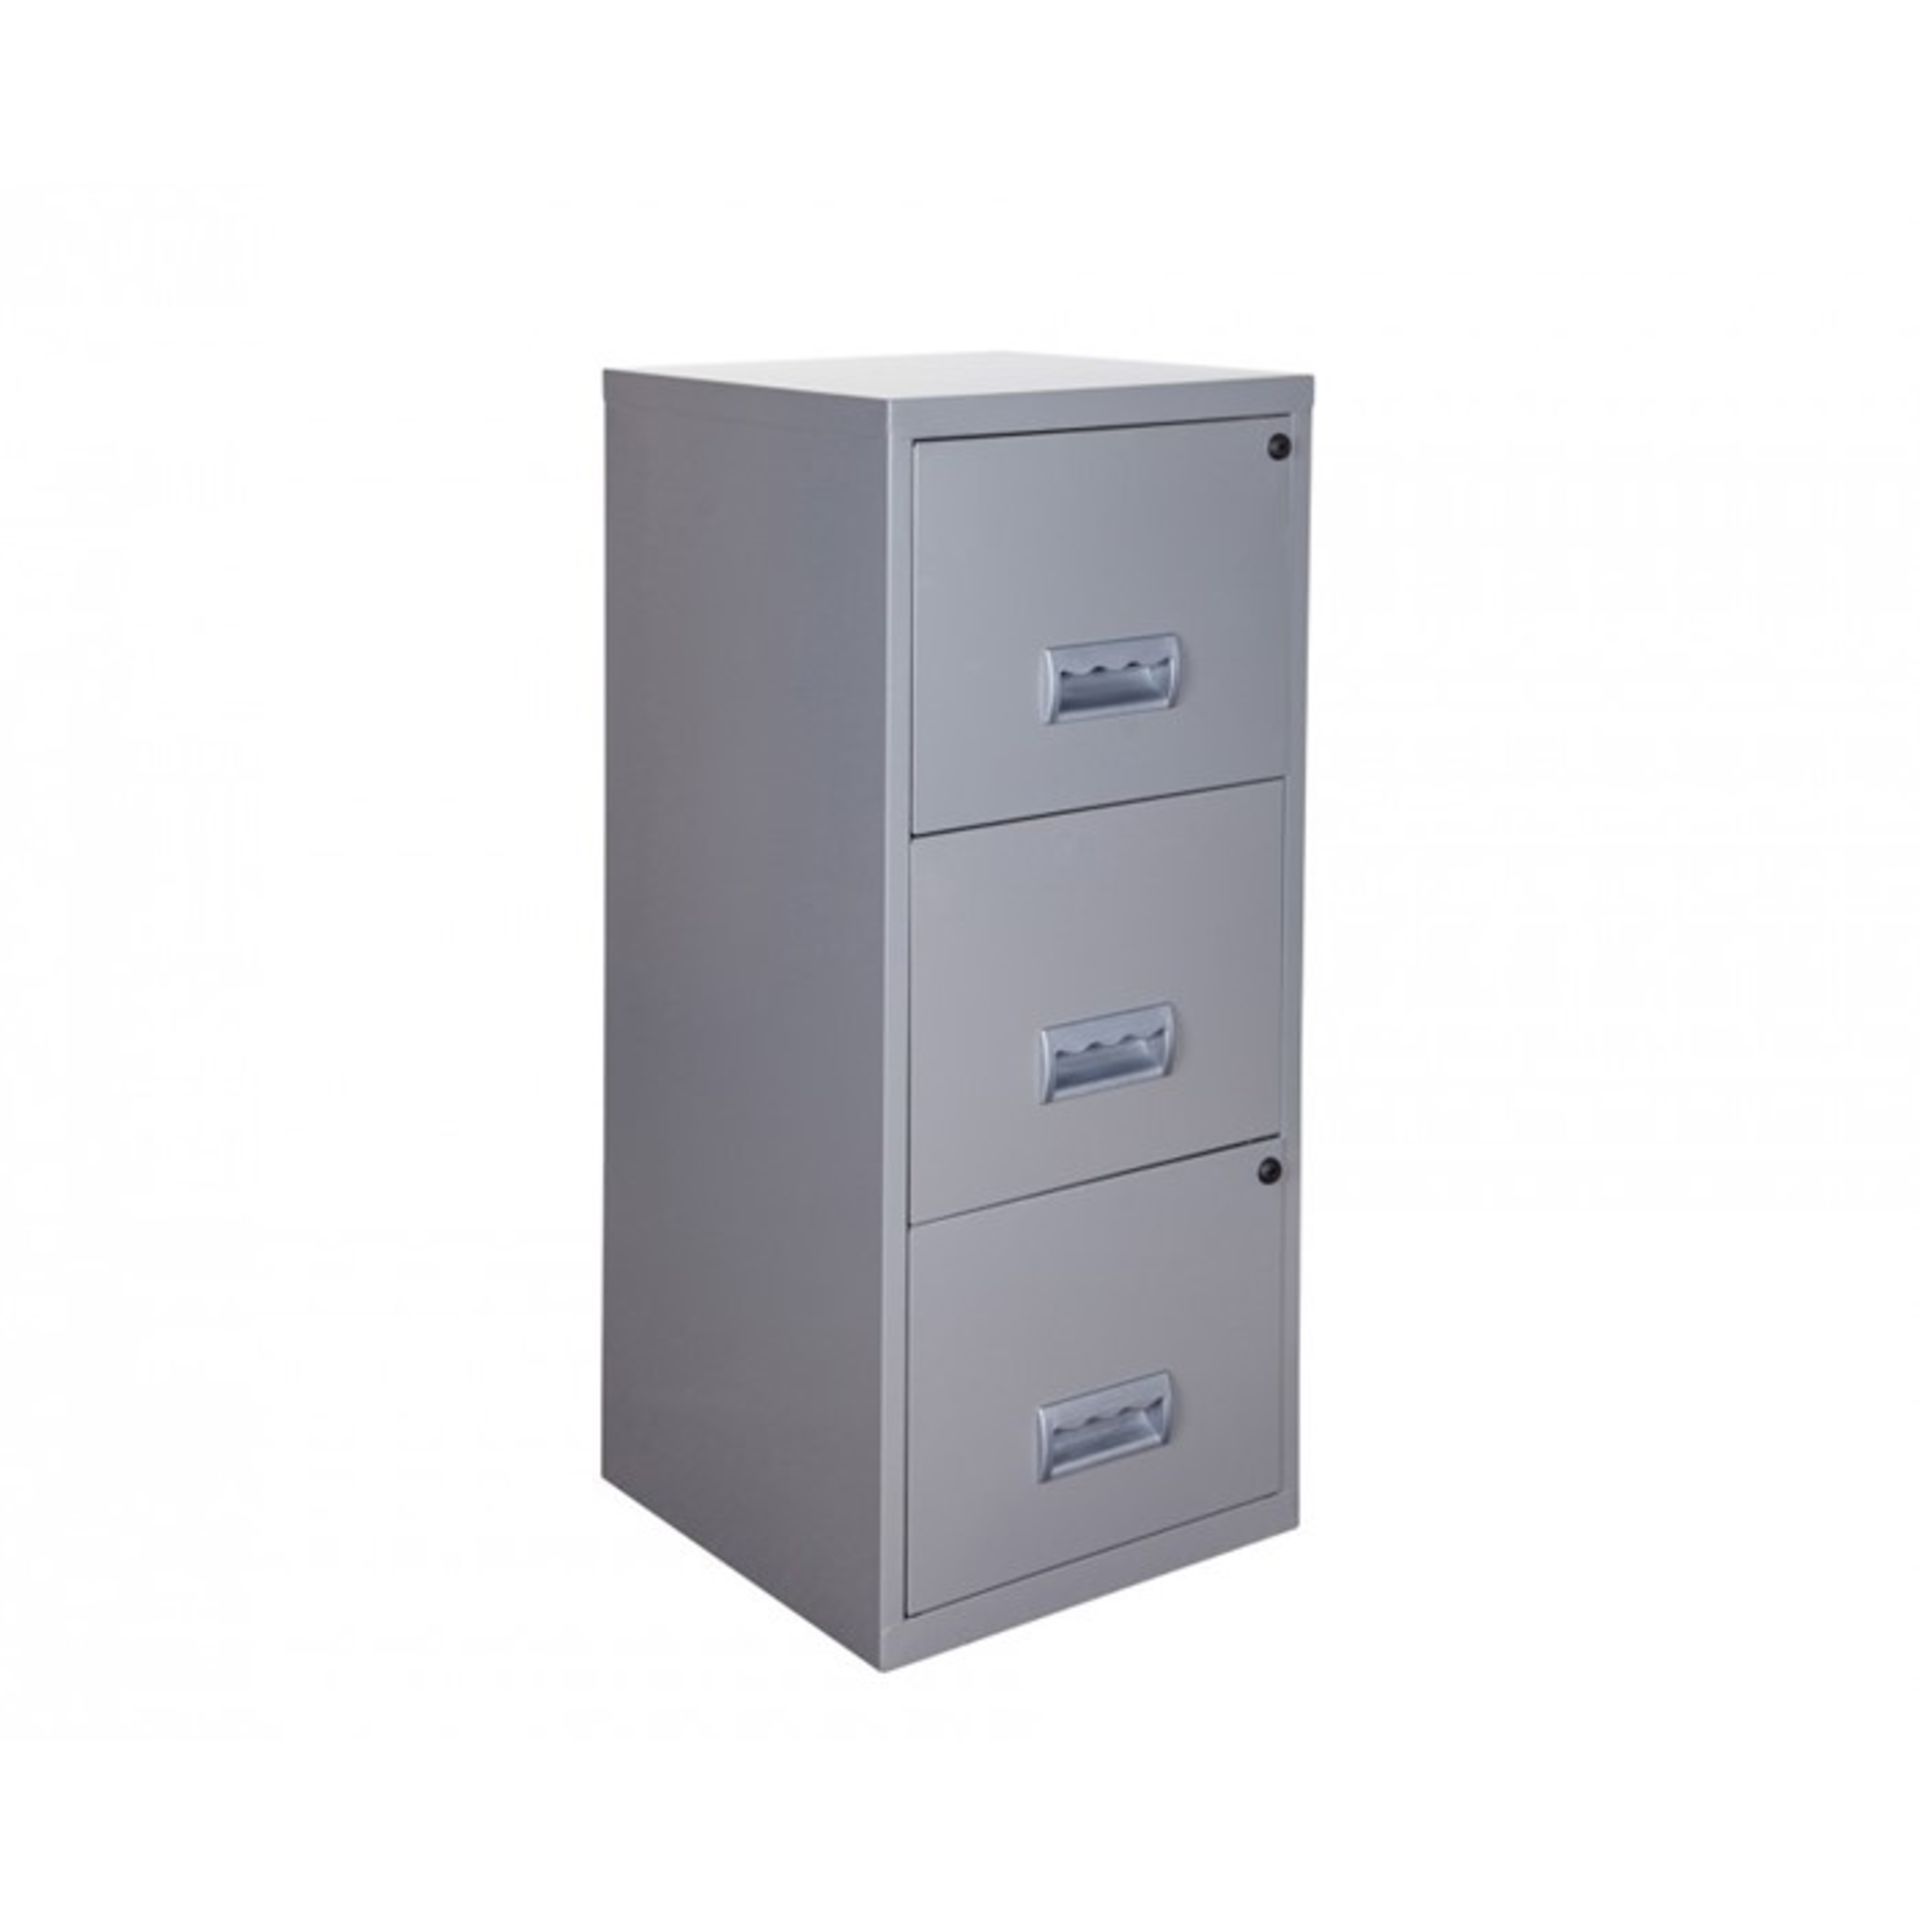 1 GRADE A PACKAGED RYMANS A4 3 DRAWER MAIX FILING CABINET IN SILVER / RRP £79.99 (VIEWING HIGHLY